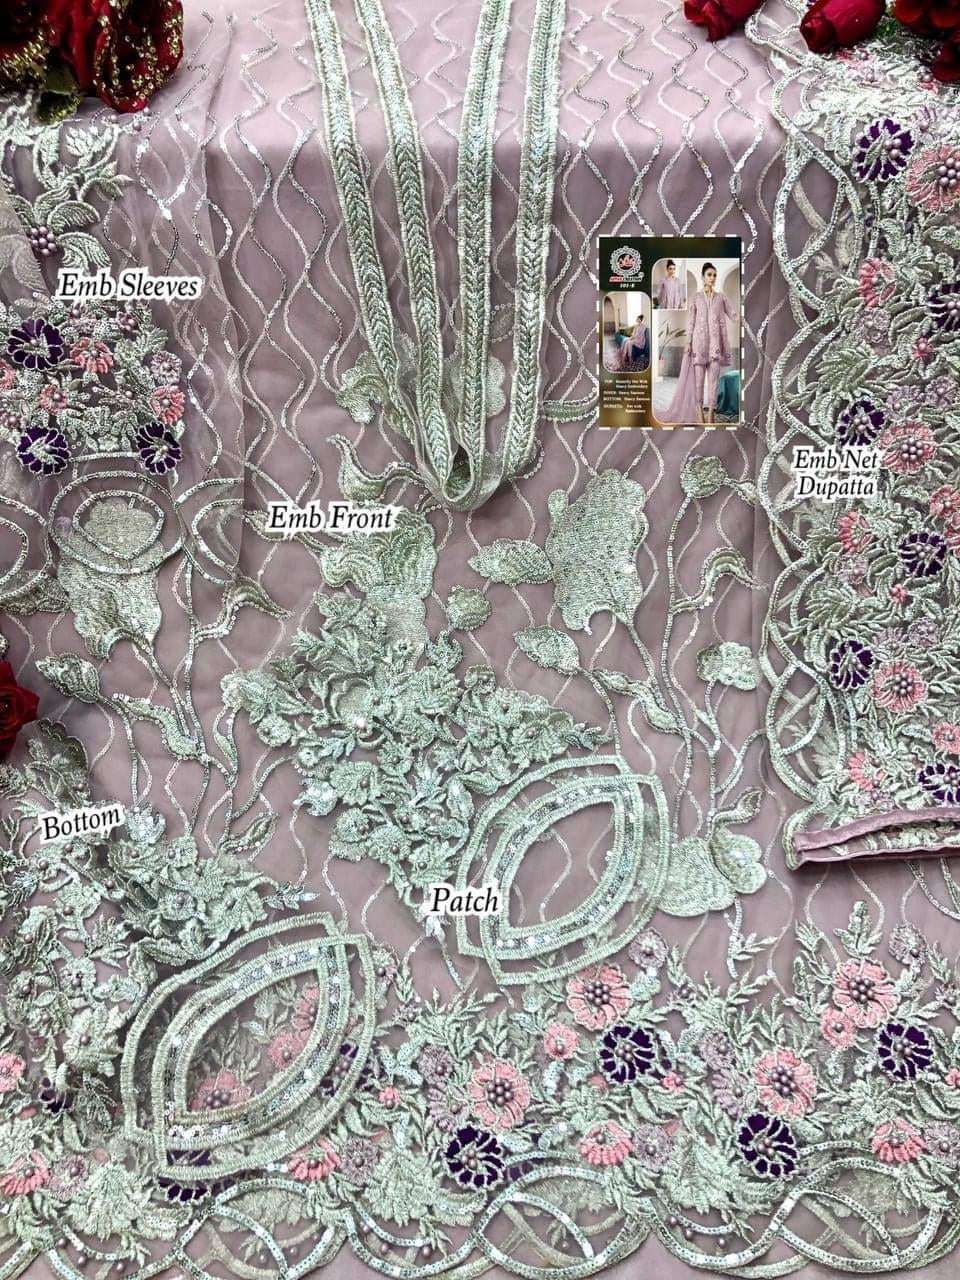 AFFAN CREATION 101 COLOURS NX BY AFFAN CREATION PAKISTANI STYLISH BEAUTIFUL COLOURFUL PRINTED & EMBROIDERED PARTY WEAR & OCCASIONAL WEAR HEAVY BUTTERFLY NET EMBROIDERY DRESSES AT WHOLESALE PRICE